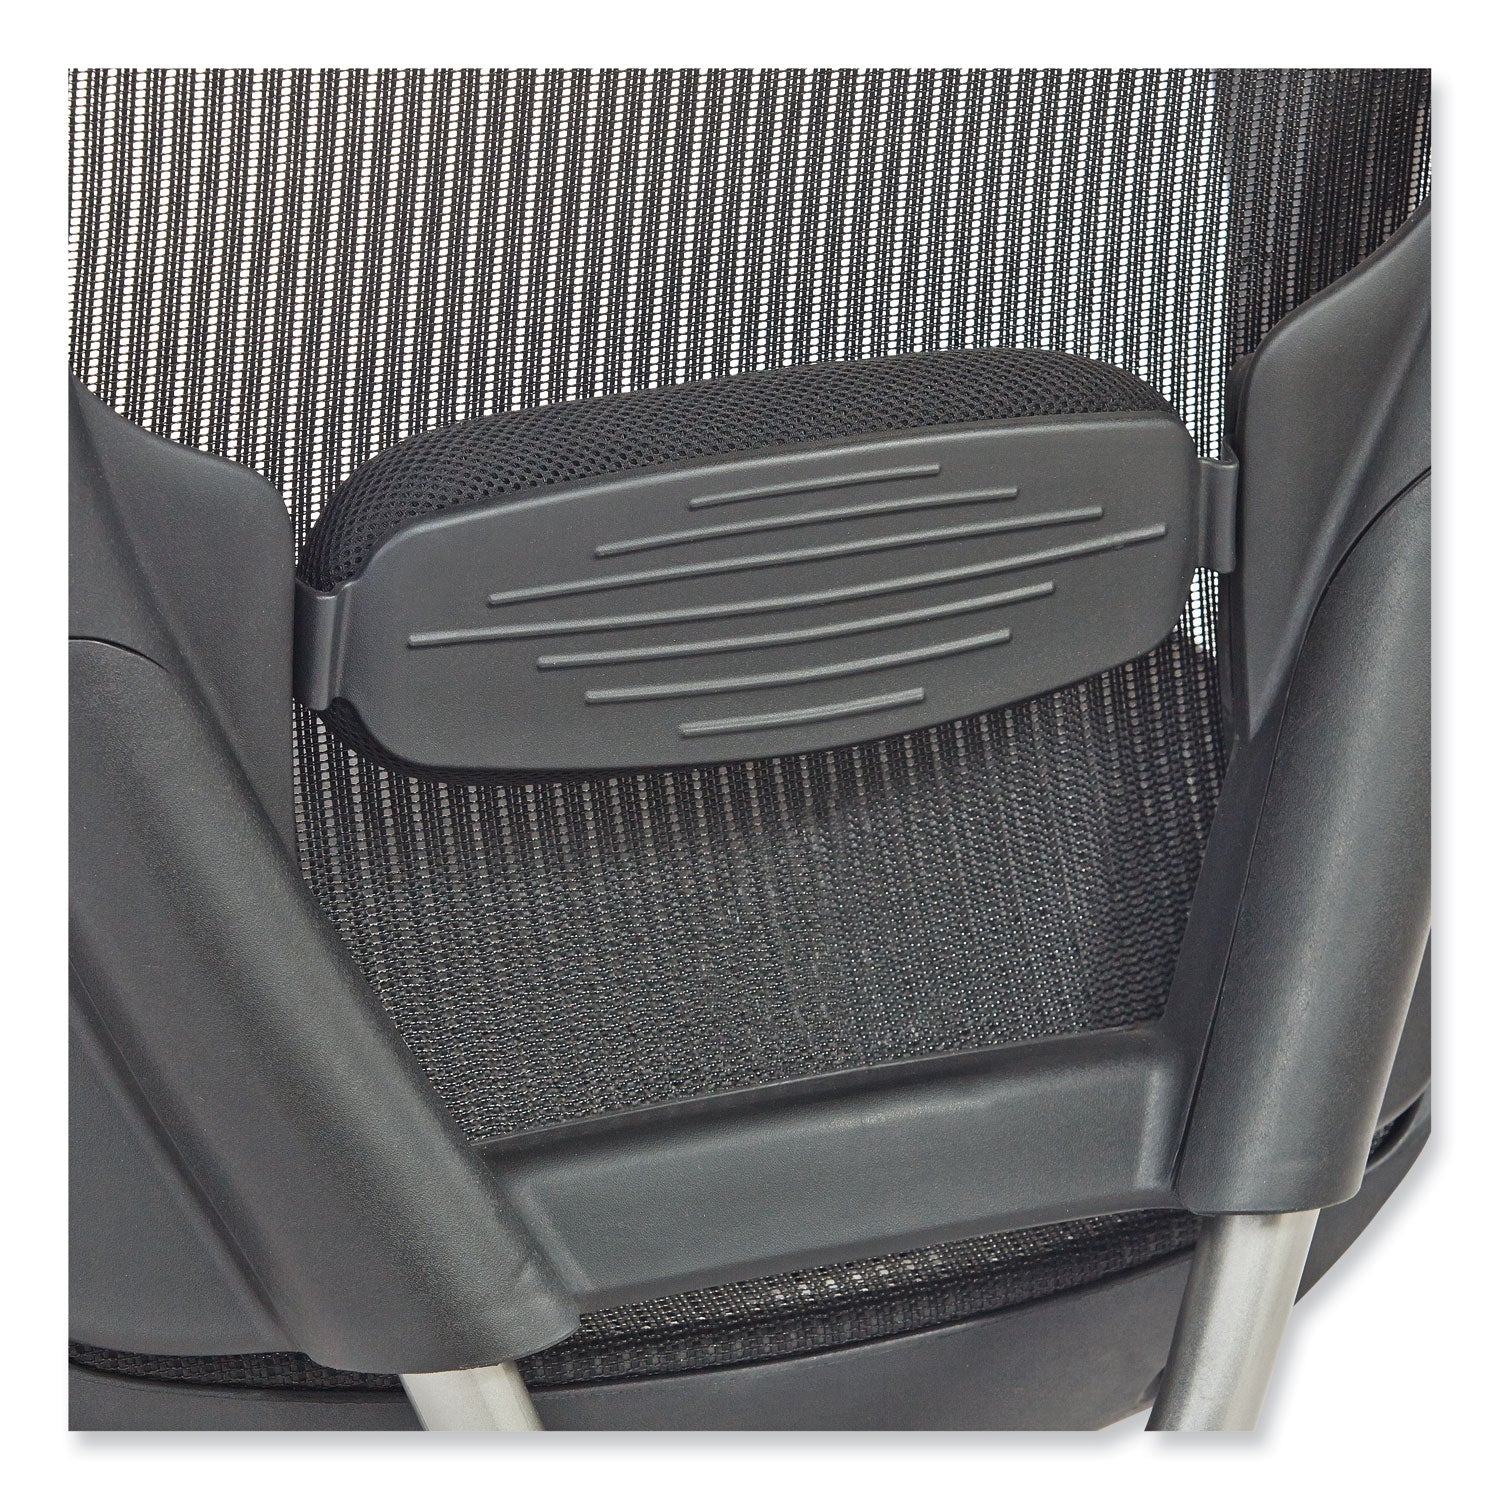 lineage-big-&-tall-all-mesh-task-chair-supports-400lb-195--2325-high-black-seatchrome-baseships-in-1-3-business-days_saf3505bl - 7